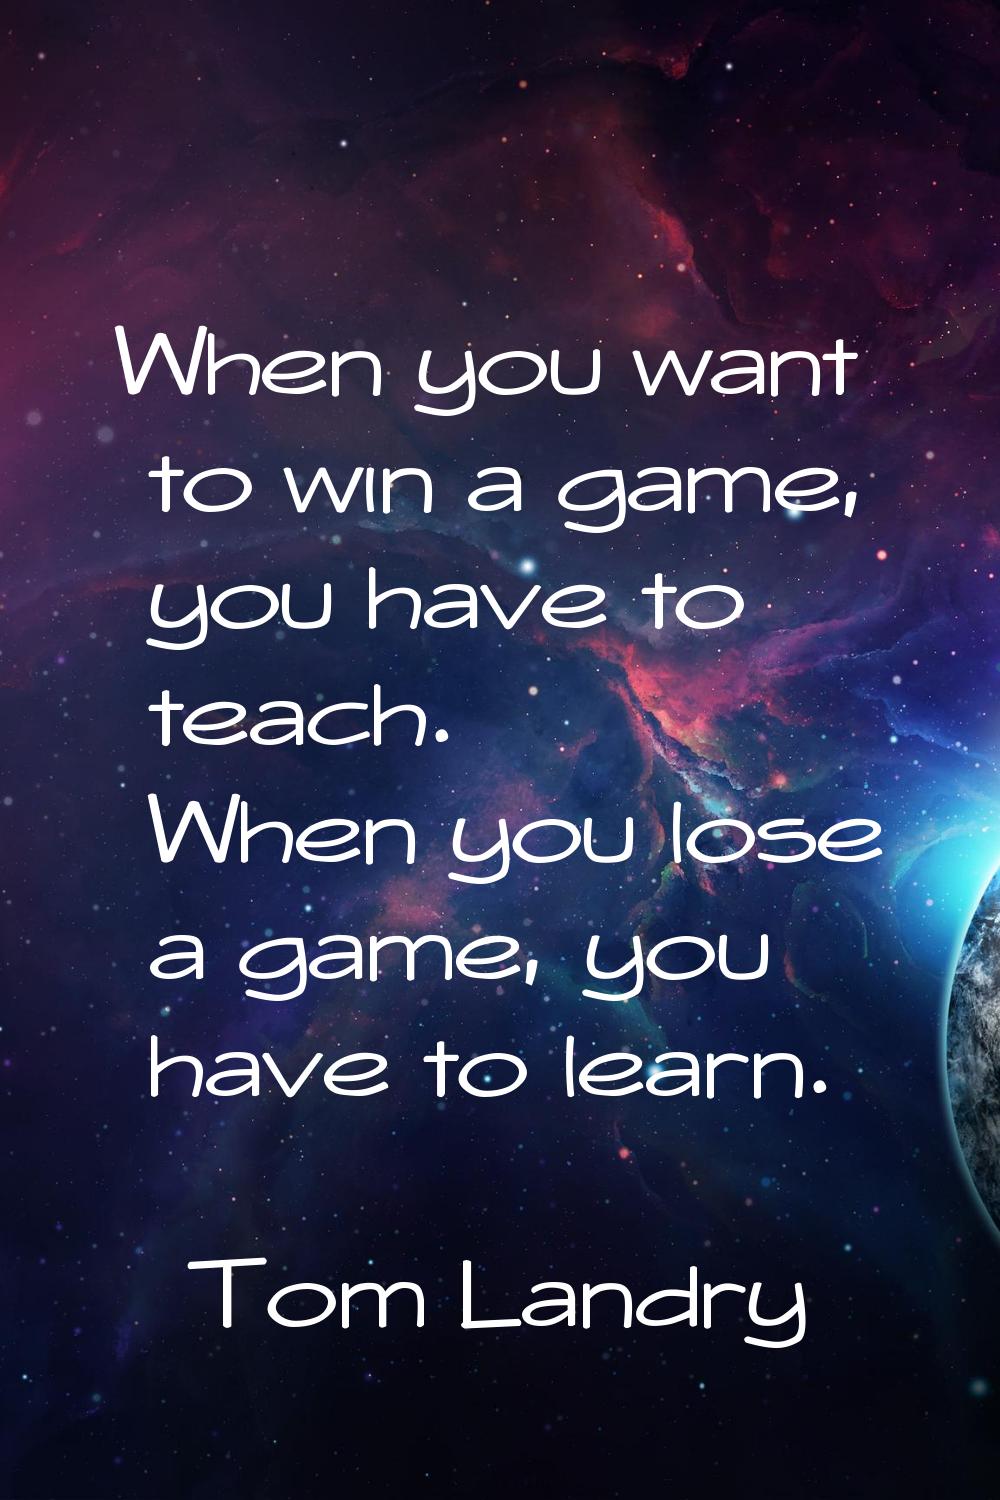 When you want to win a game, you have to teach. When you lose a game, you have to learn.